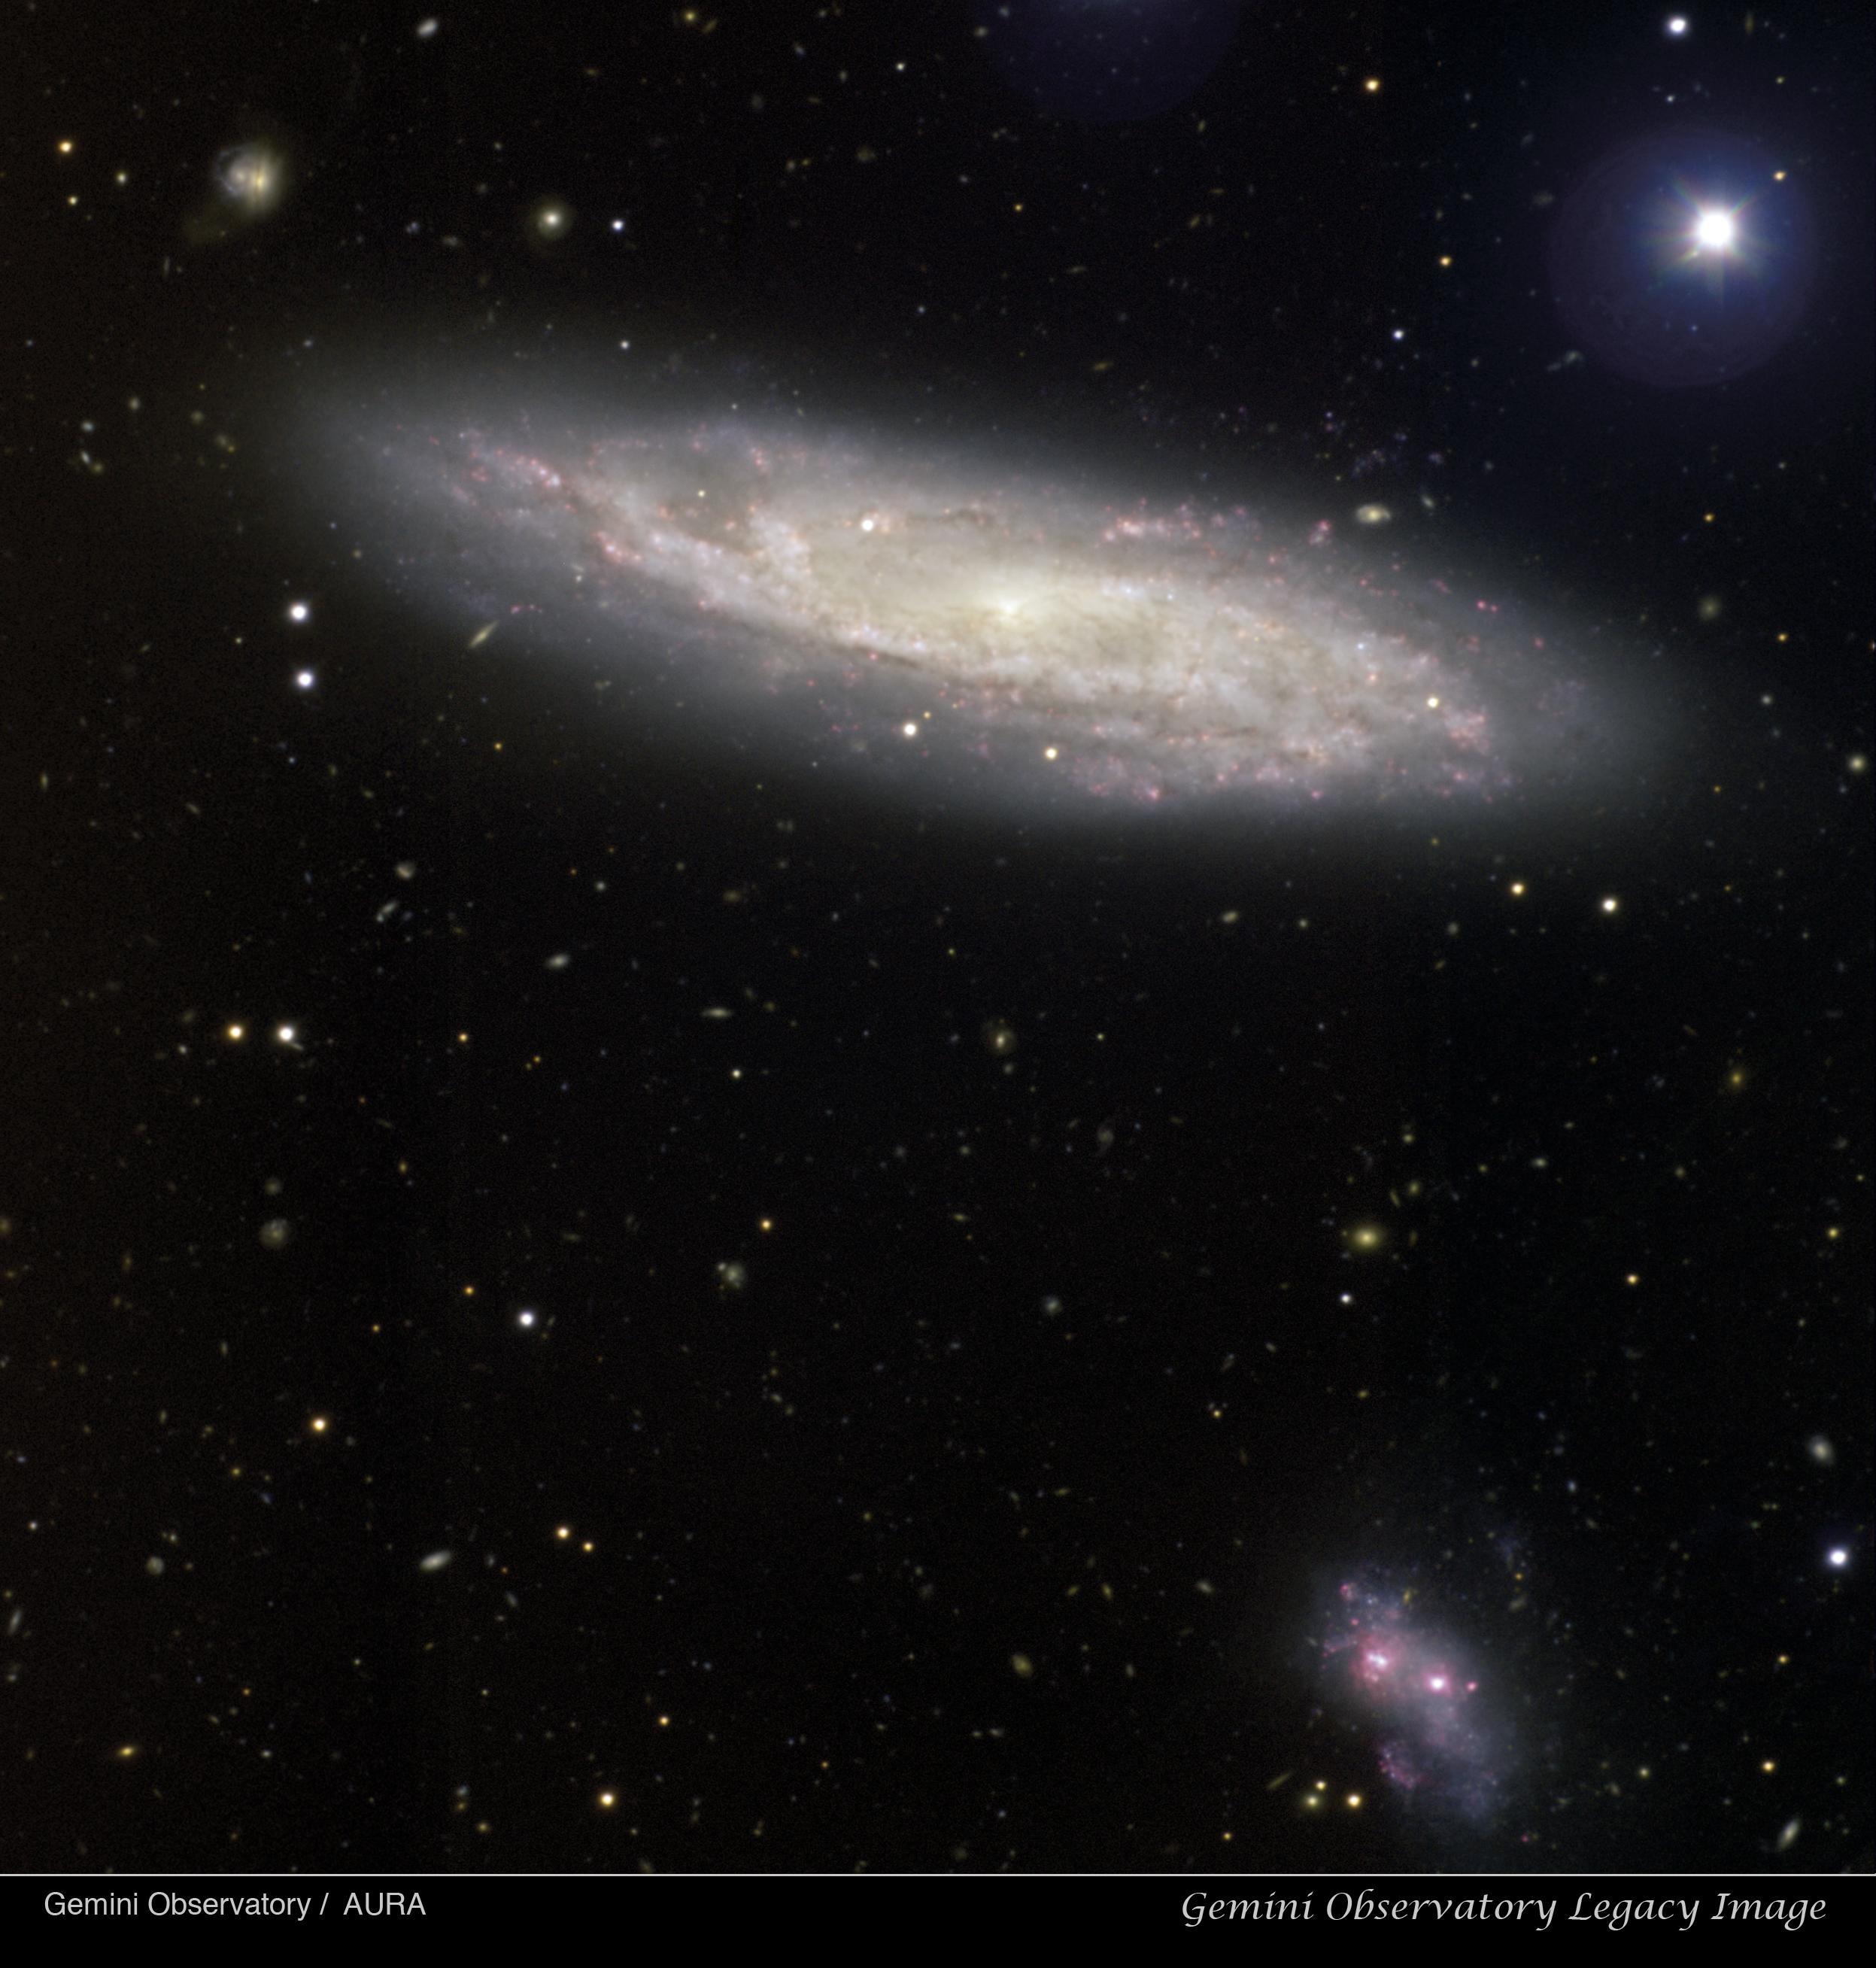 NGC 2770 with SN 2008D